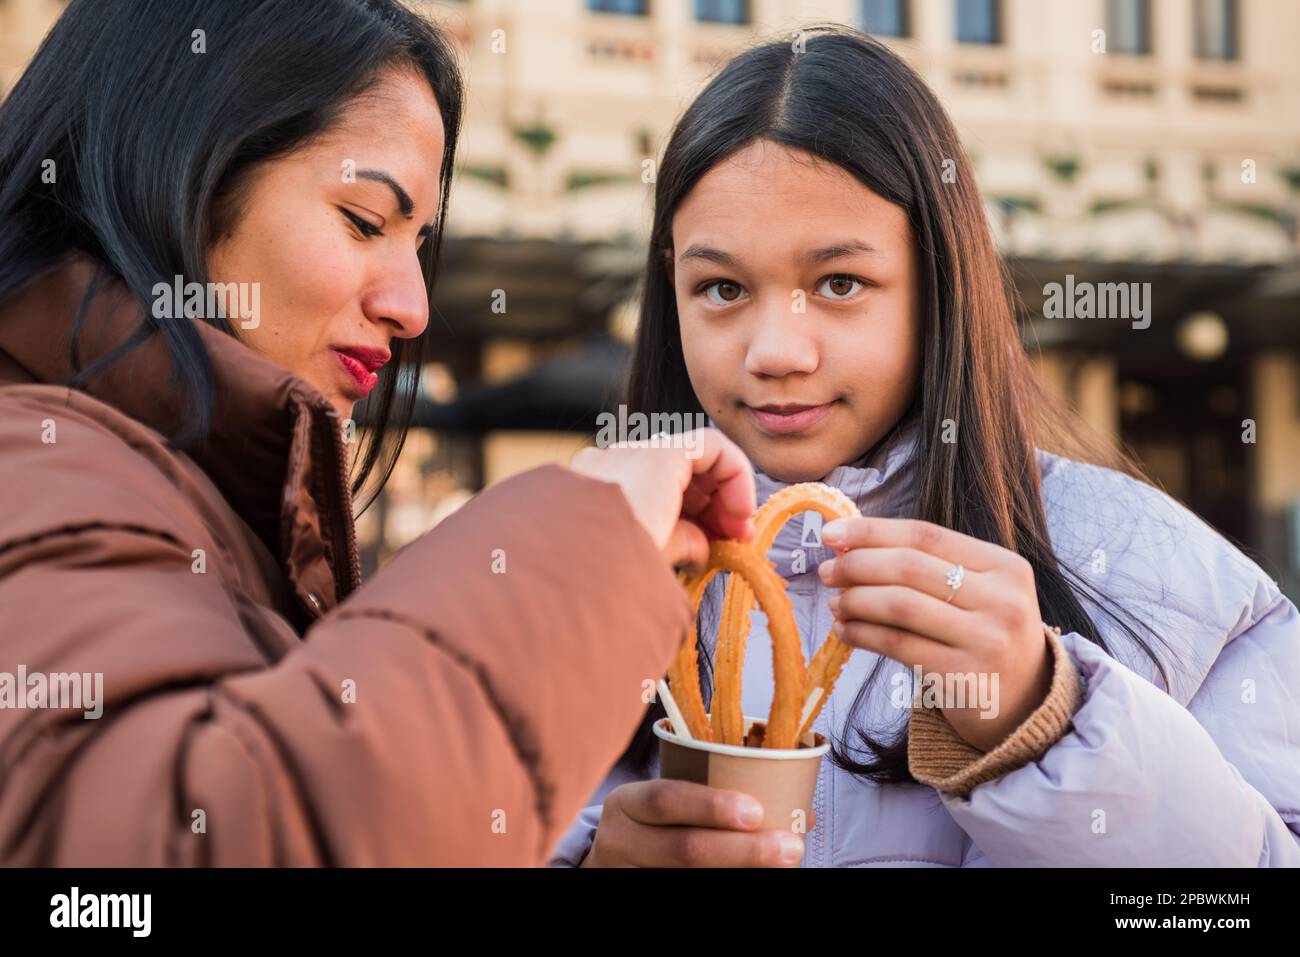 Teenager eating snack looking at camera with her mother. Stock Photo